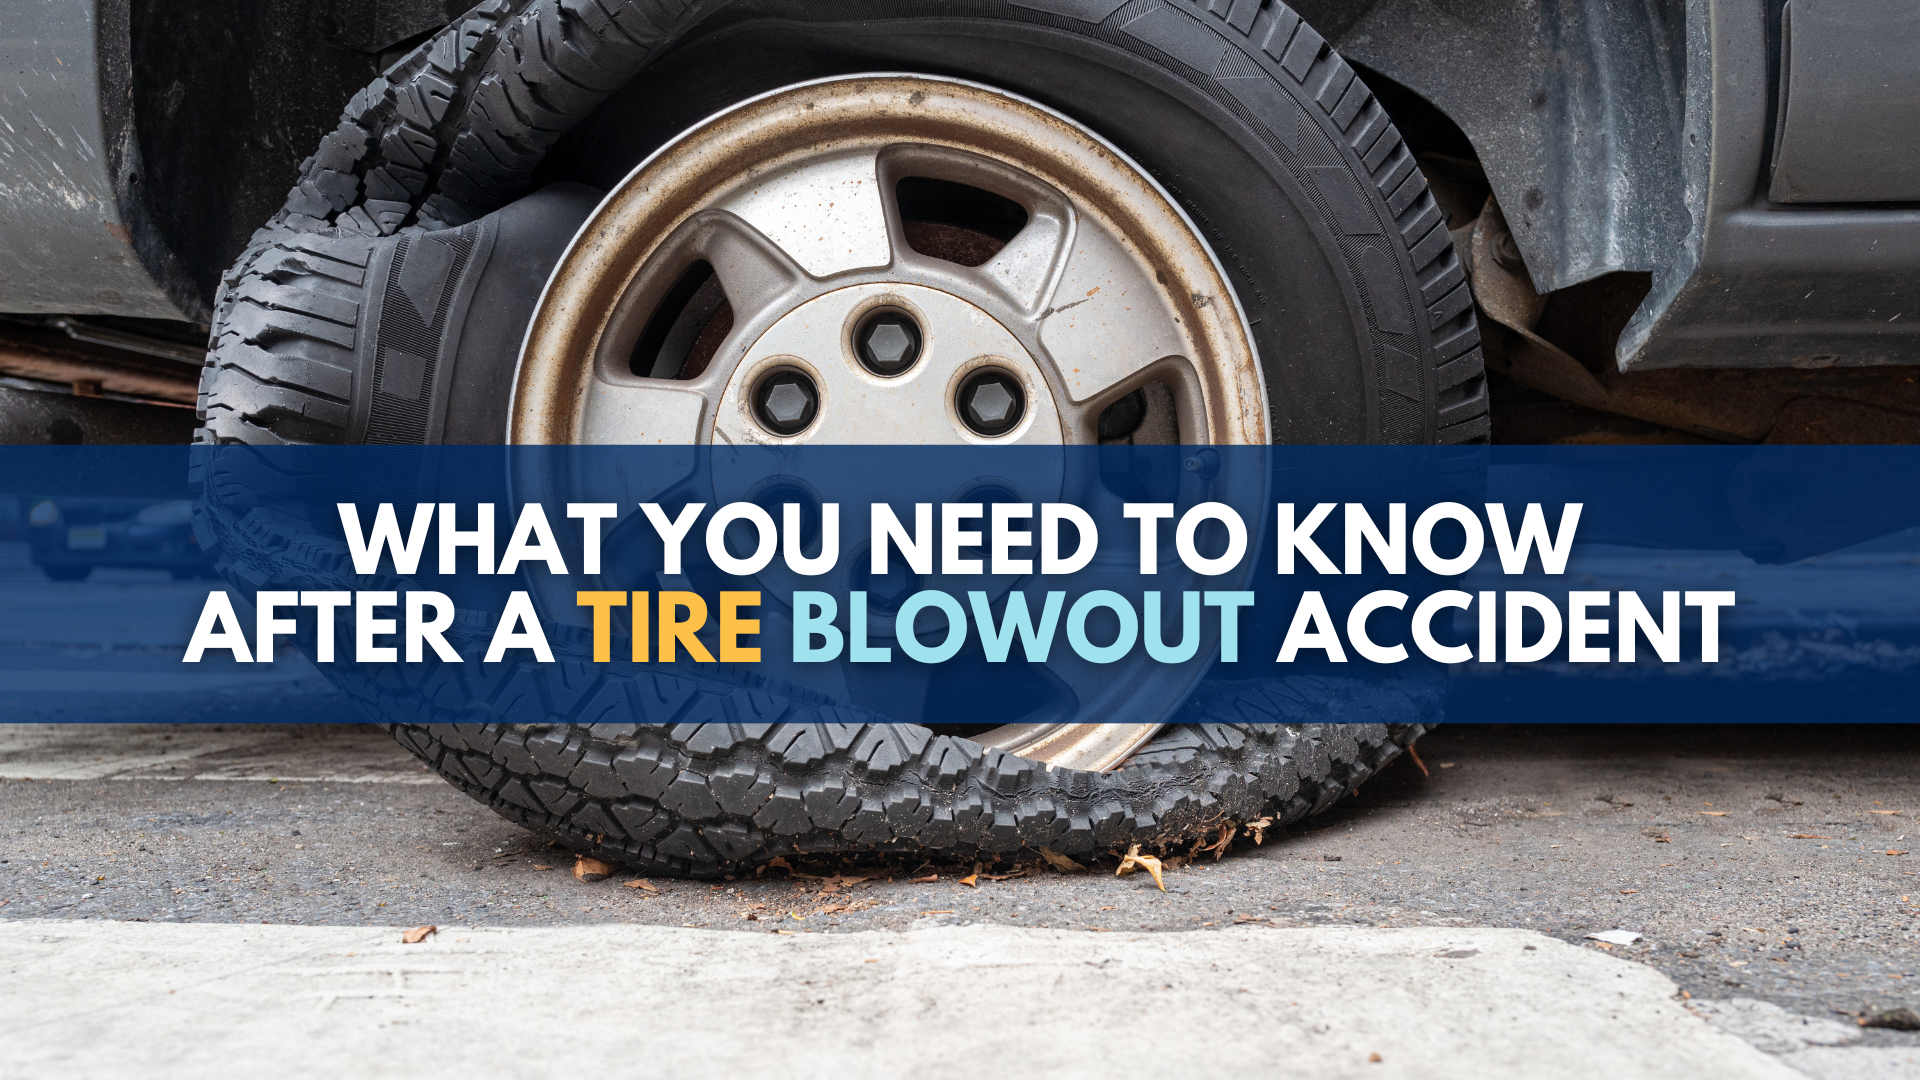 What you need to know after a tire blowout accident